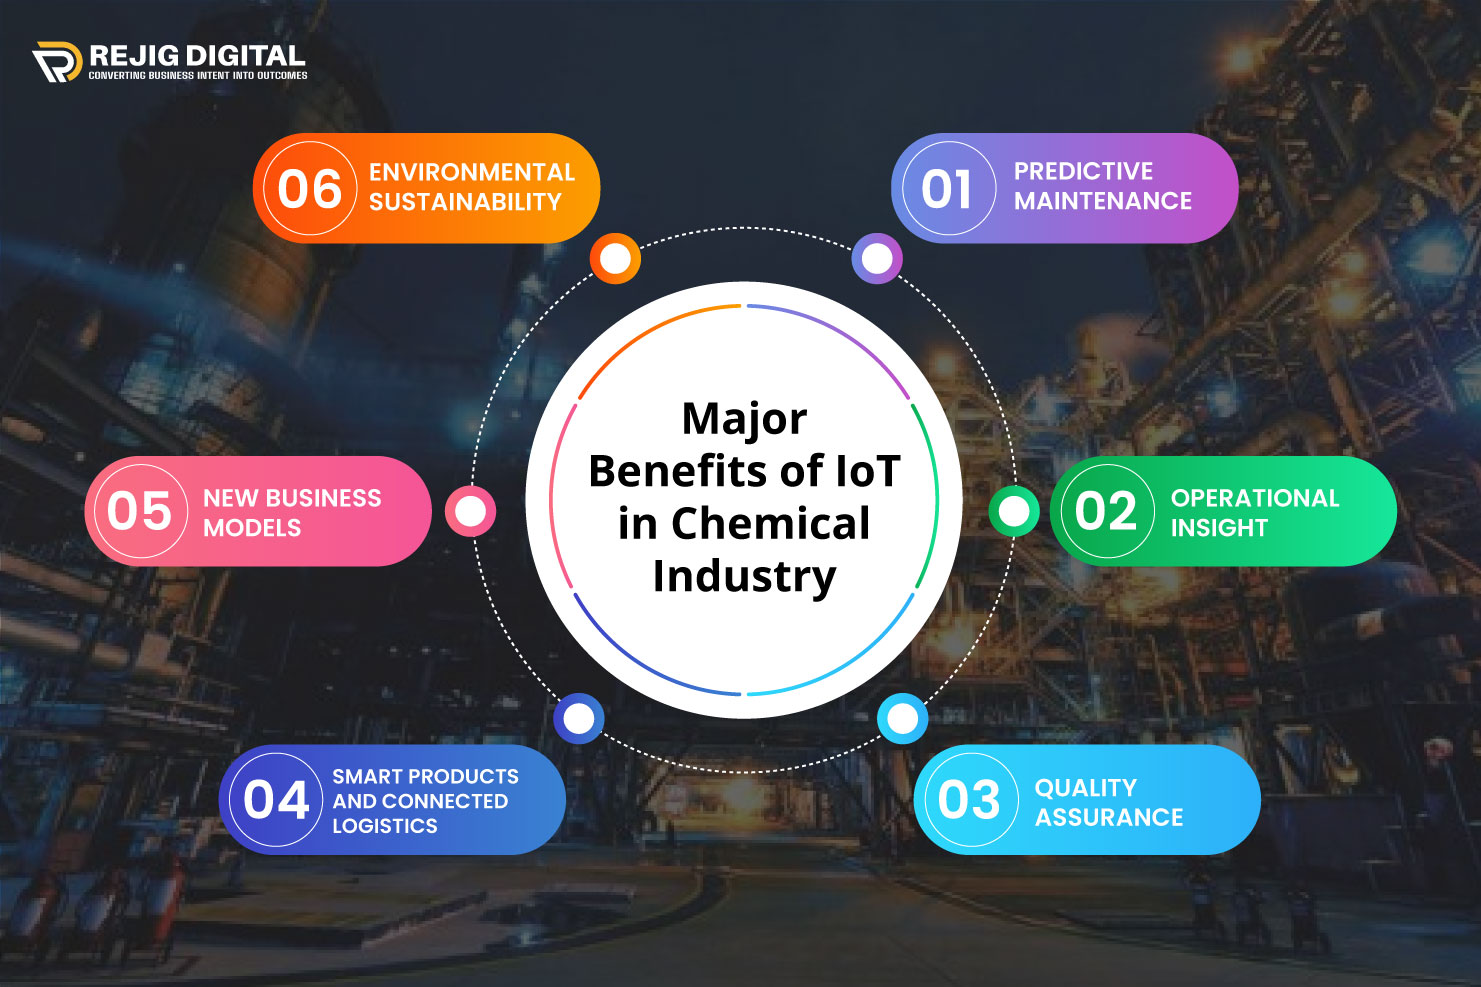 Major Benefits of IoT in Chemical Industry